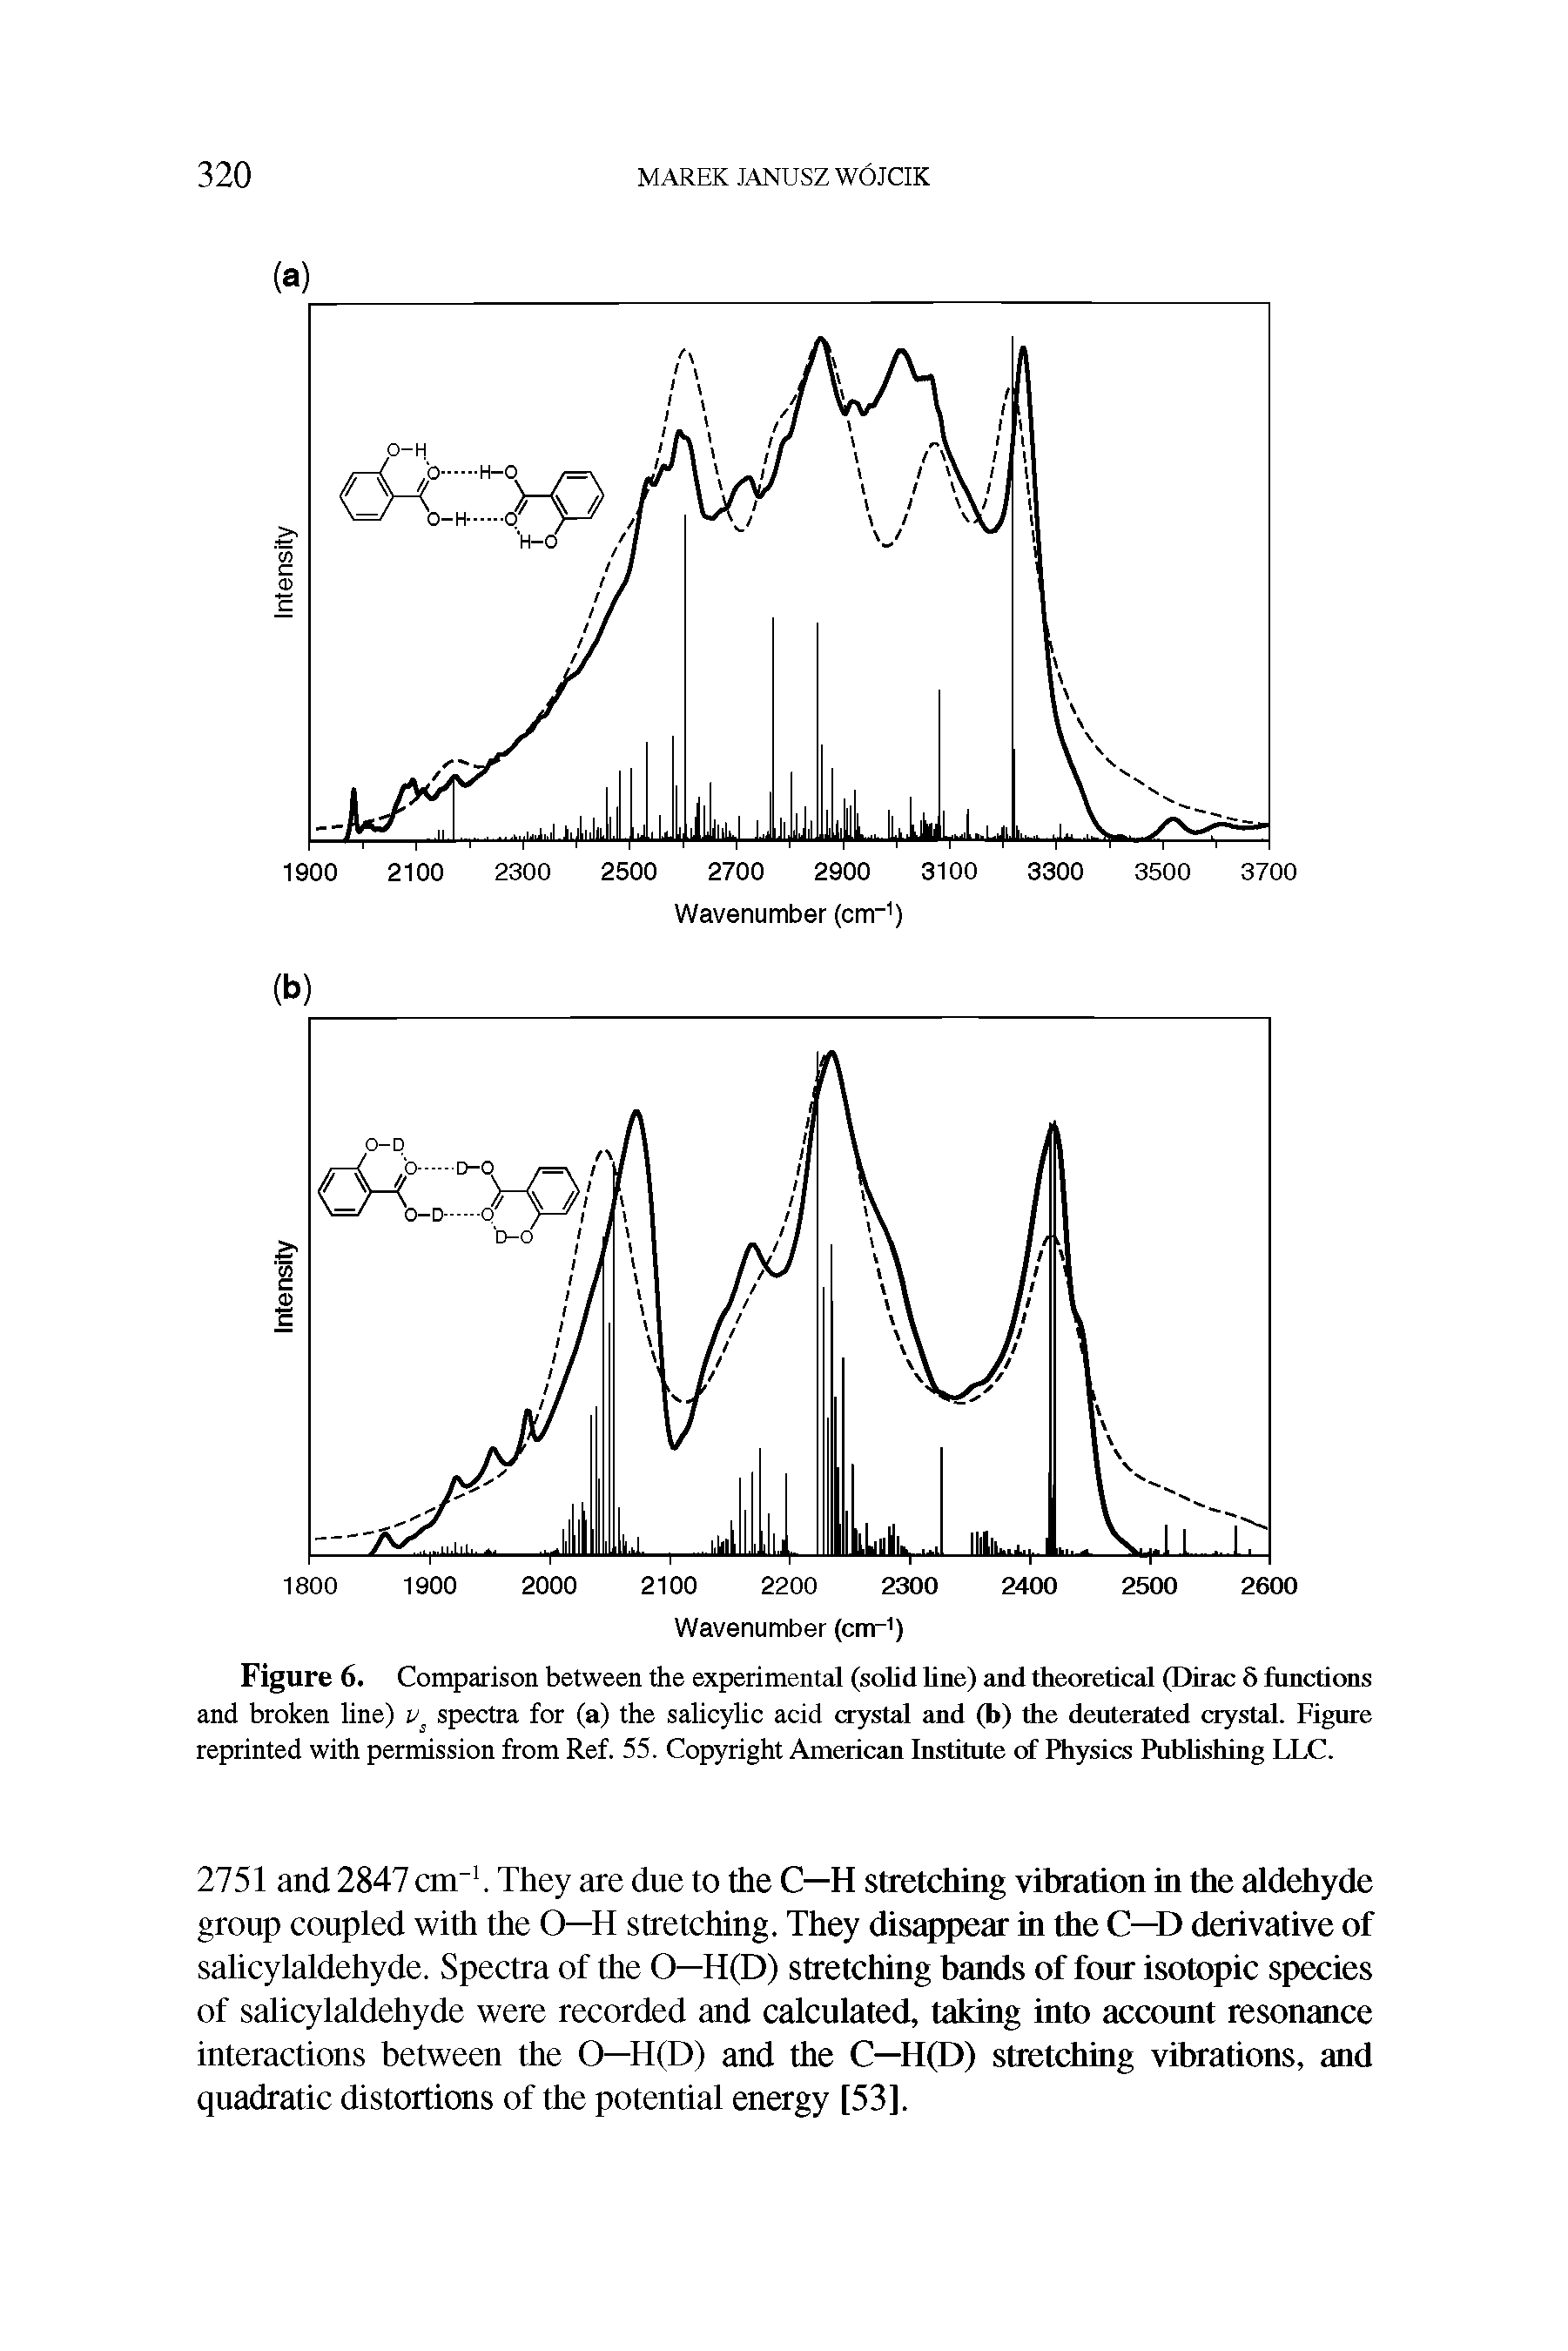 Figure 6. Comparison between the experimental (solid line) and theoretical (Dirac 5 functions and broken line) spectra for (a) the salicylic acid crystal and (b) the deuterated crystal. Figure reprinted with permission from Ref. 55. Copyright American Institute of Hiysics Publishing LLC.